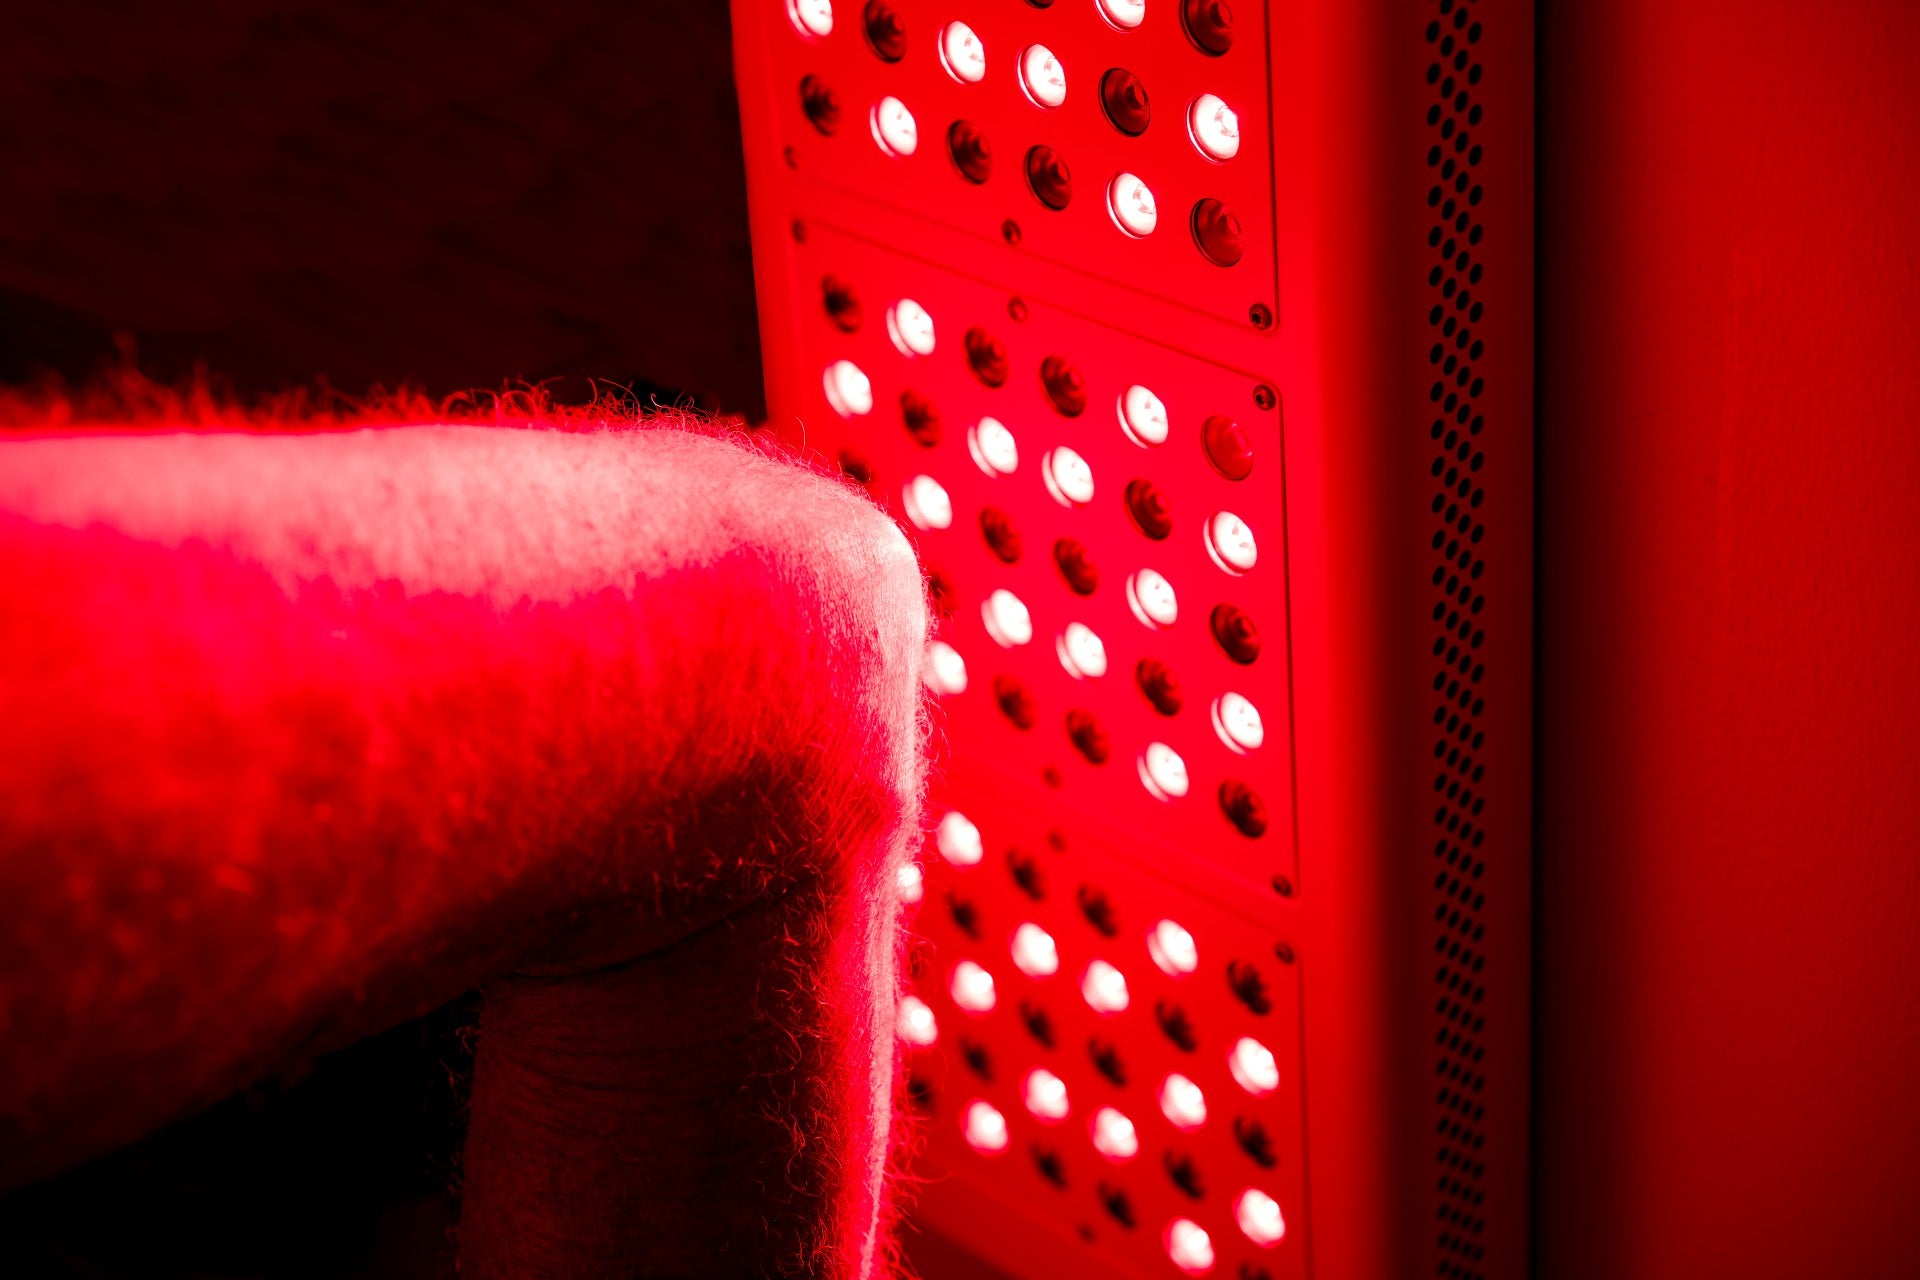 Benefits of Red Light Therapy: 10 Scientifically-Proven Benefits For More Youthful Skin